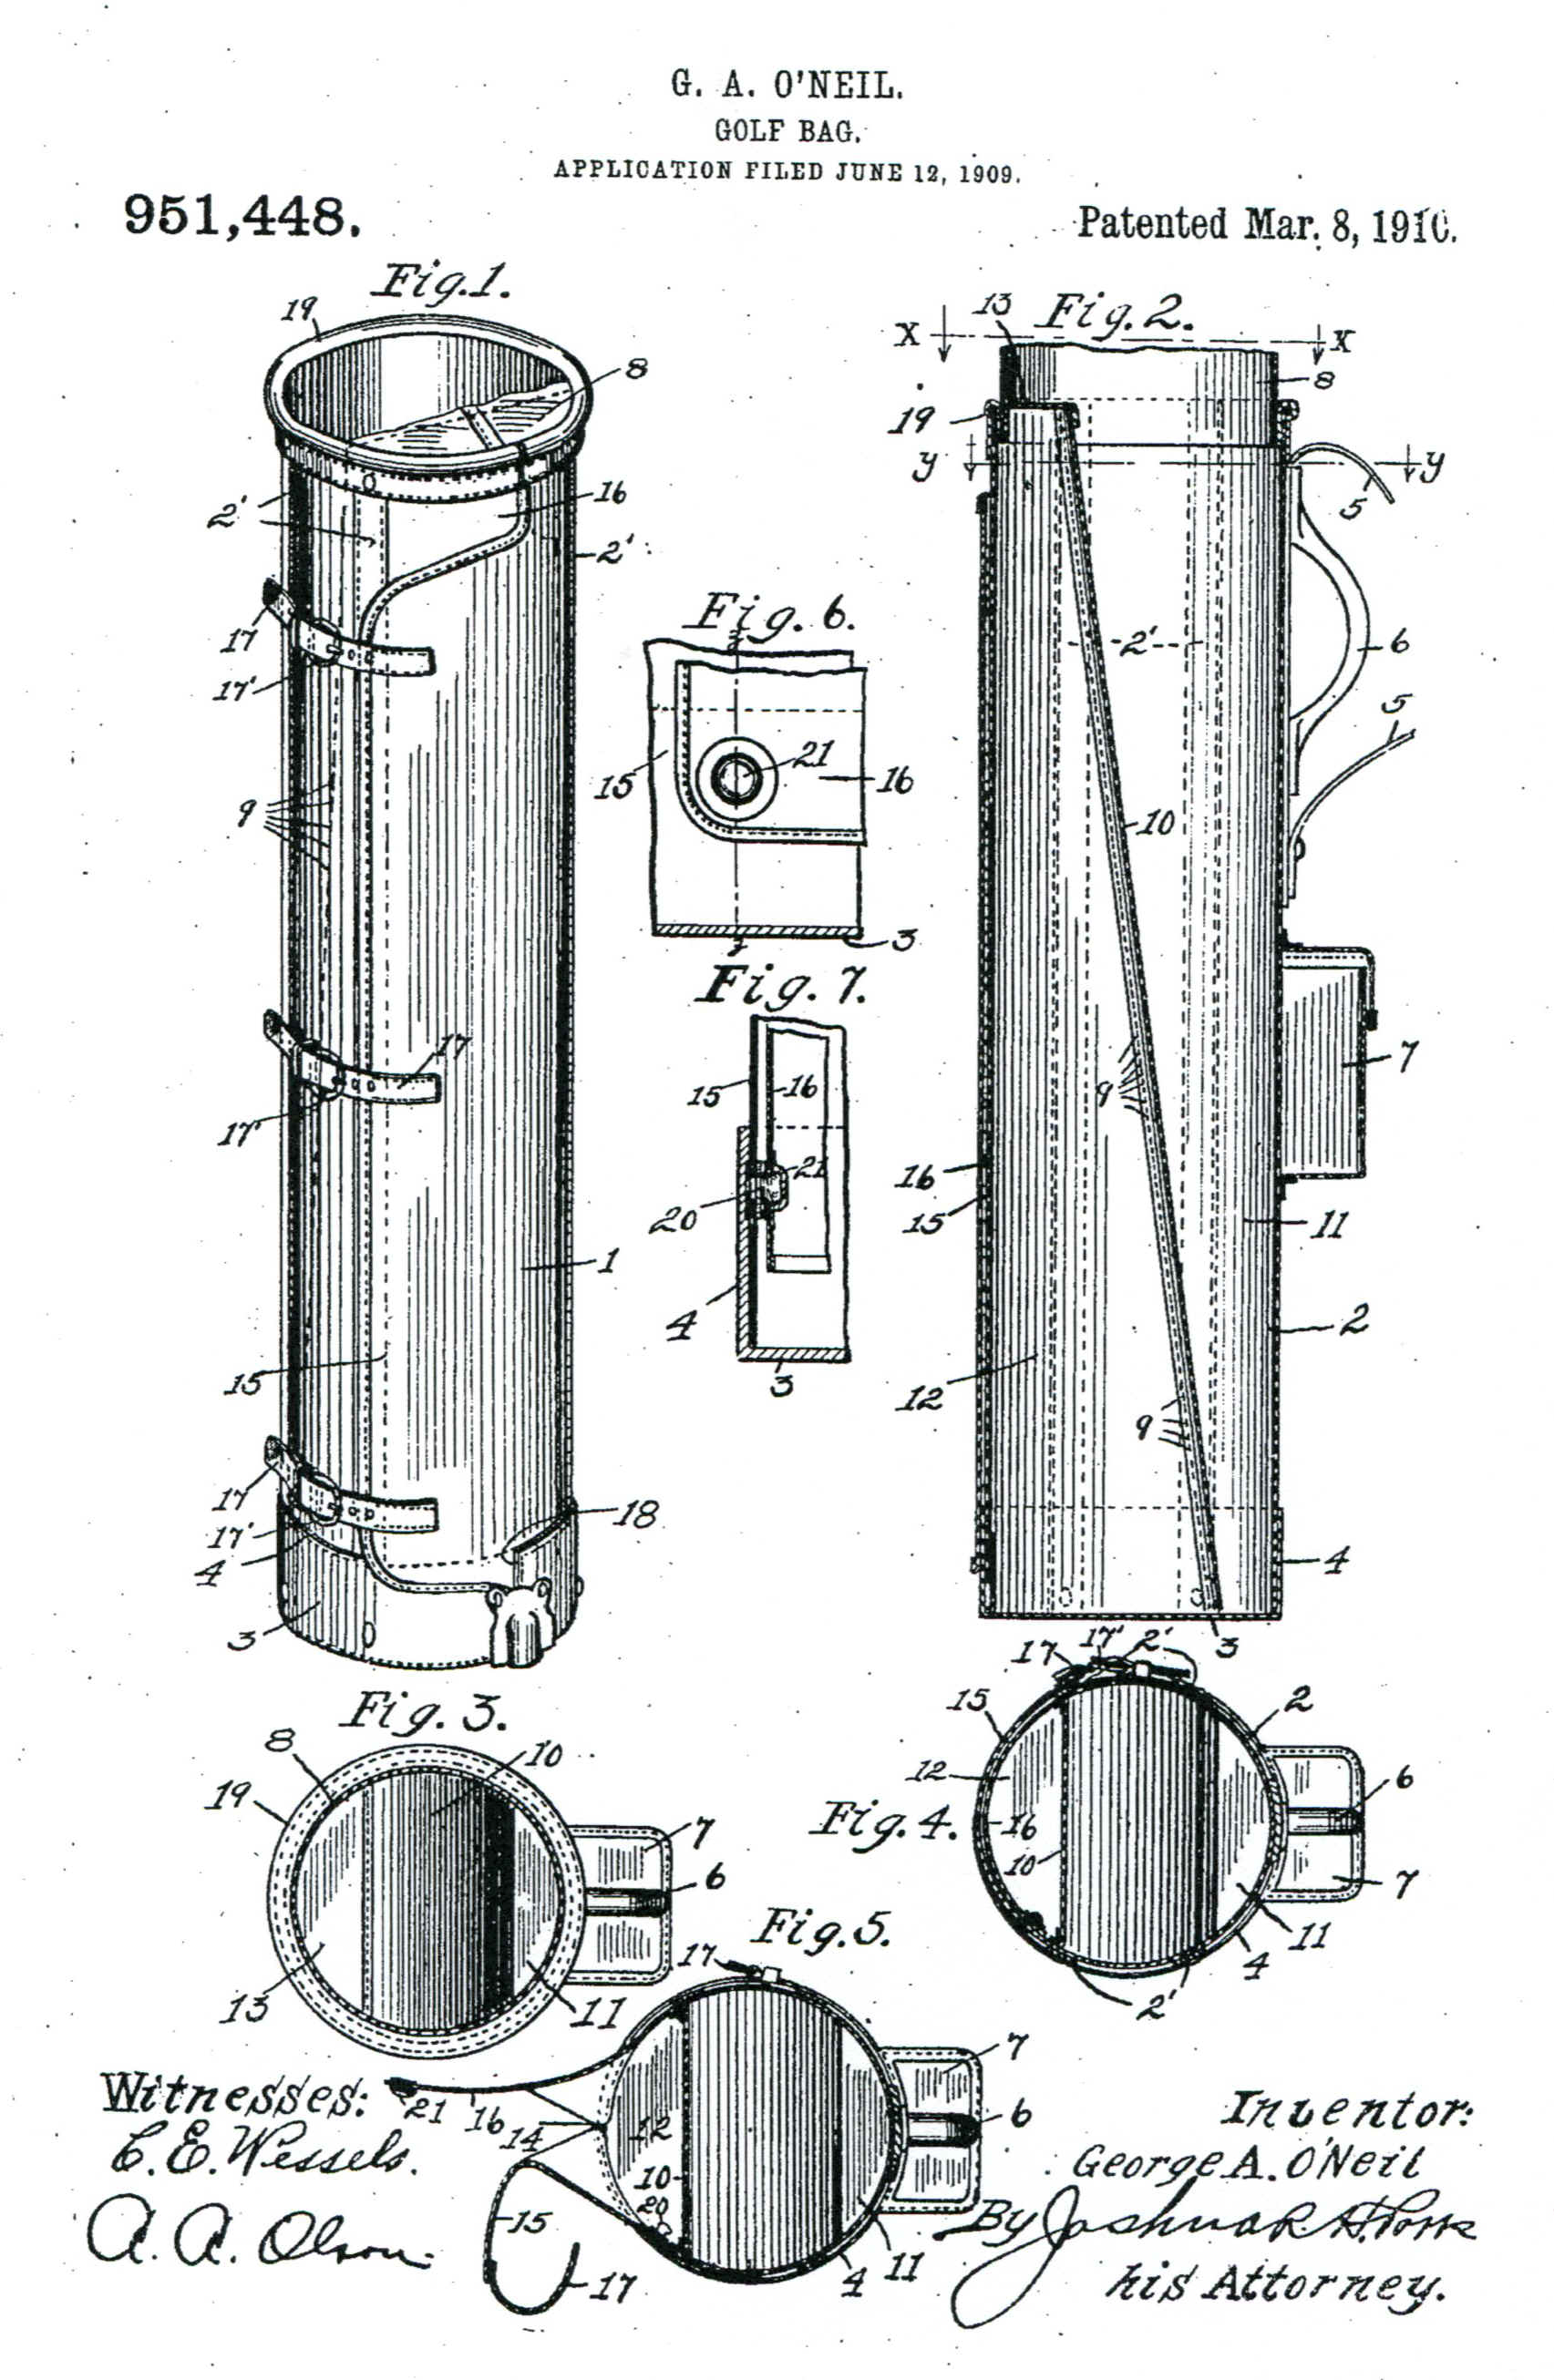 The patent drawing for GA O'Neil's 1910 Golf Bag.